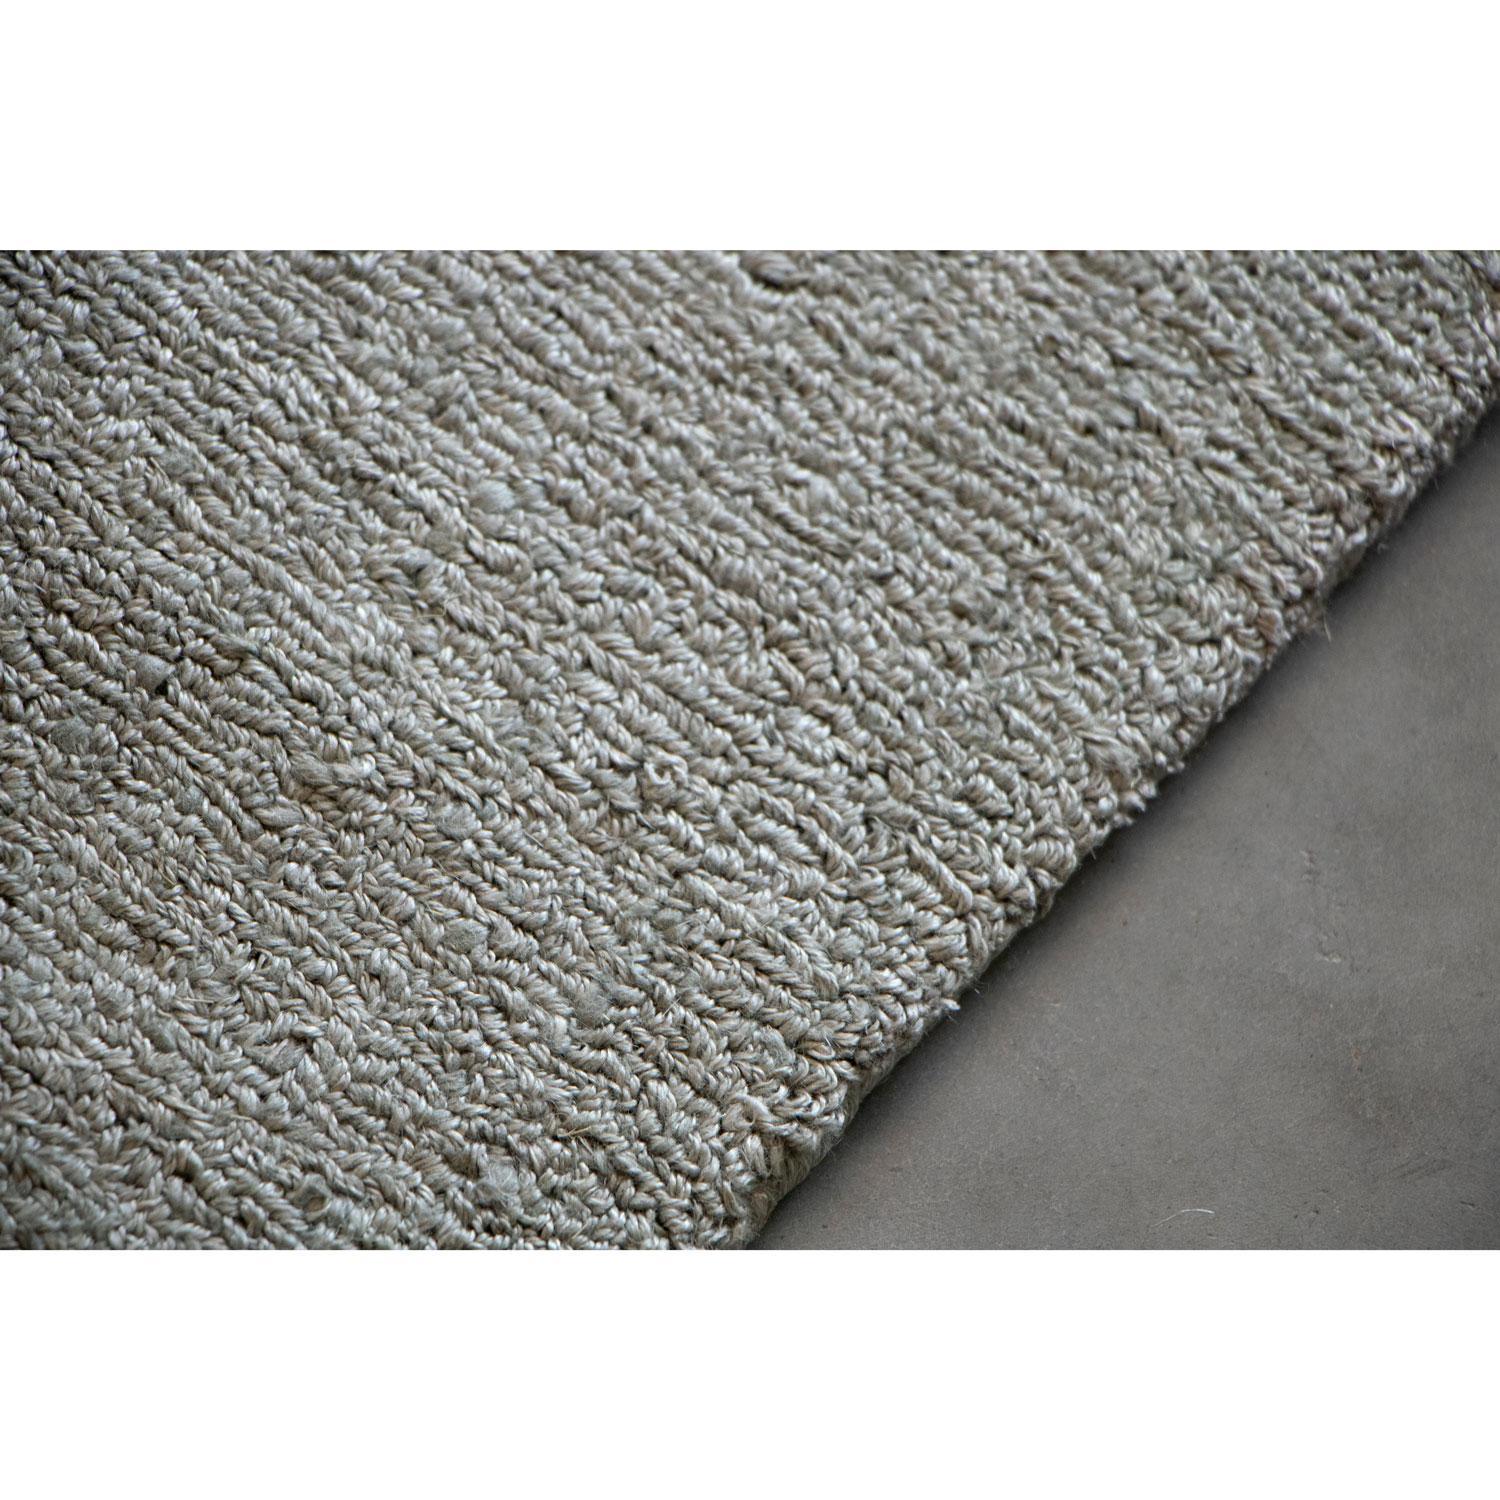 Hand-Woven 21st Cent Neutral Tones Natural Linen Rug by Deanna Comellini 150x250cm For Sale